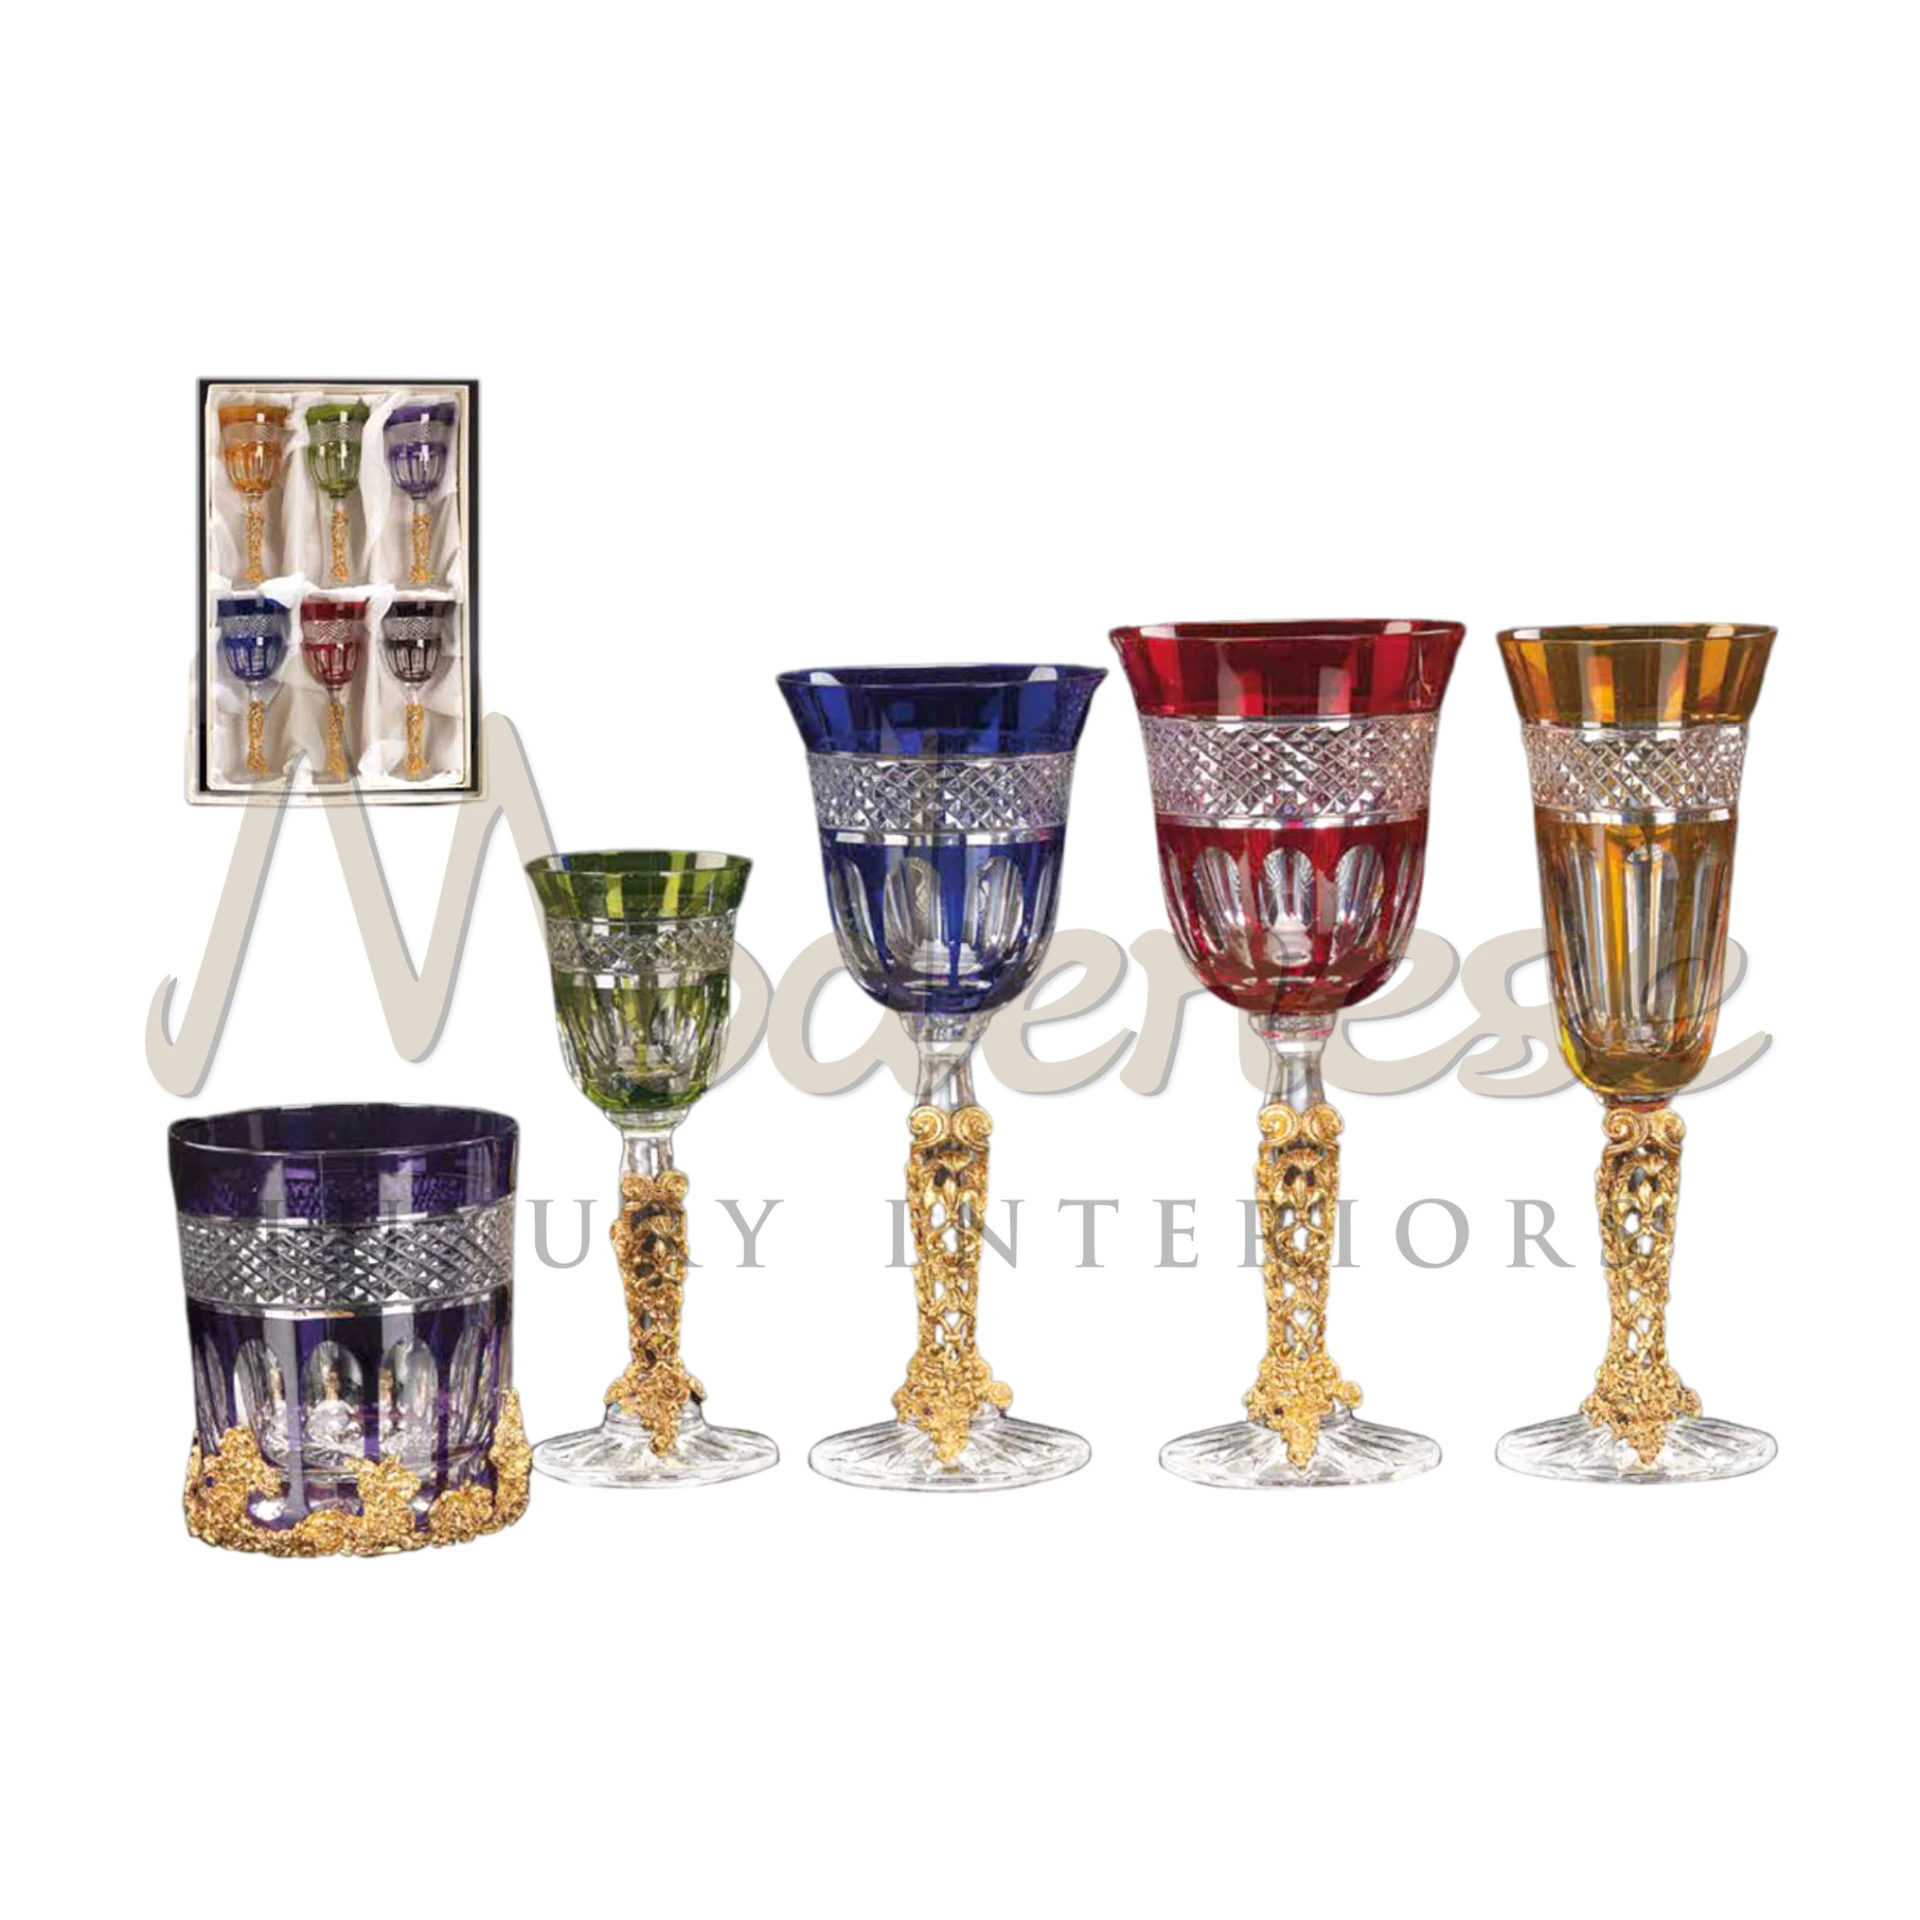 An Exclusive Colorful Glasses Set, perfect for wine, cocktails, or any beverage.